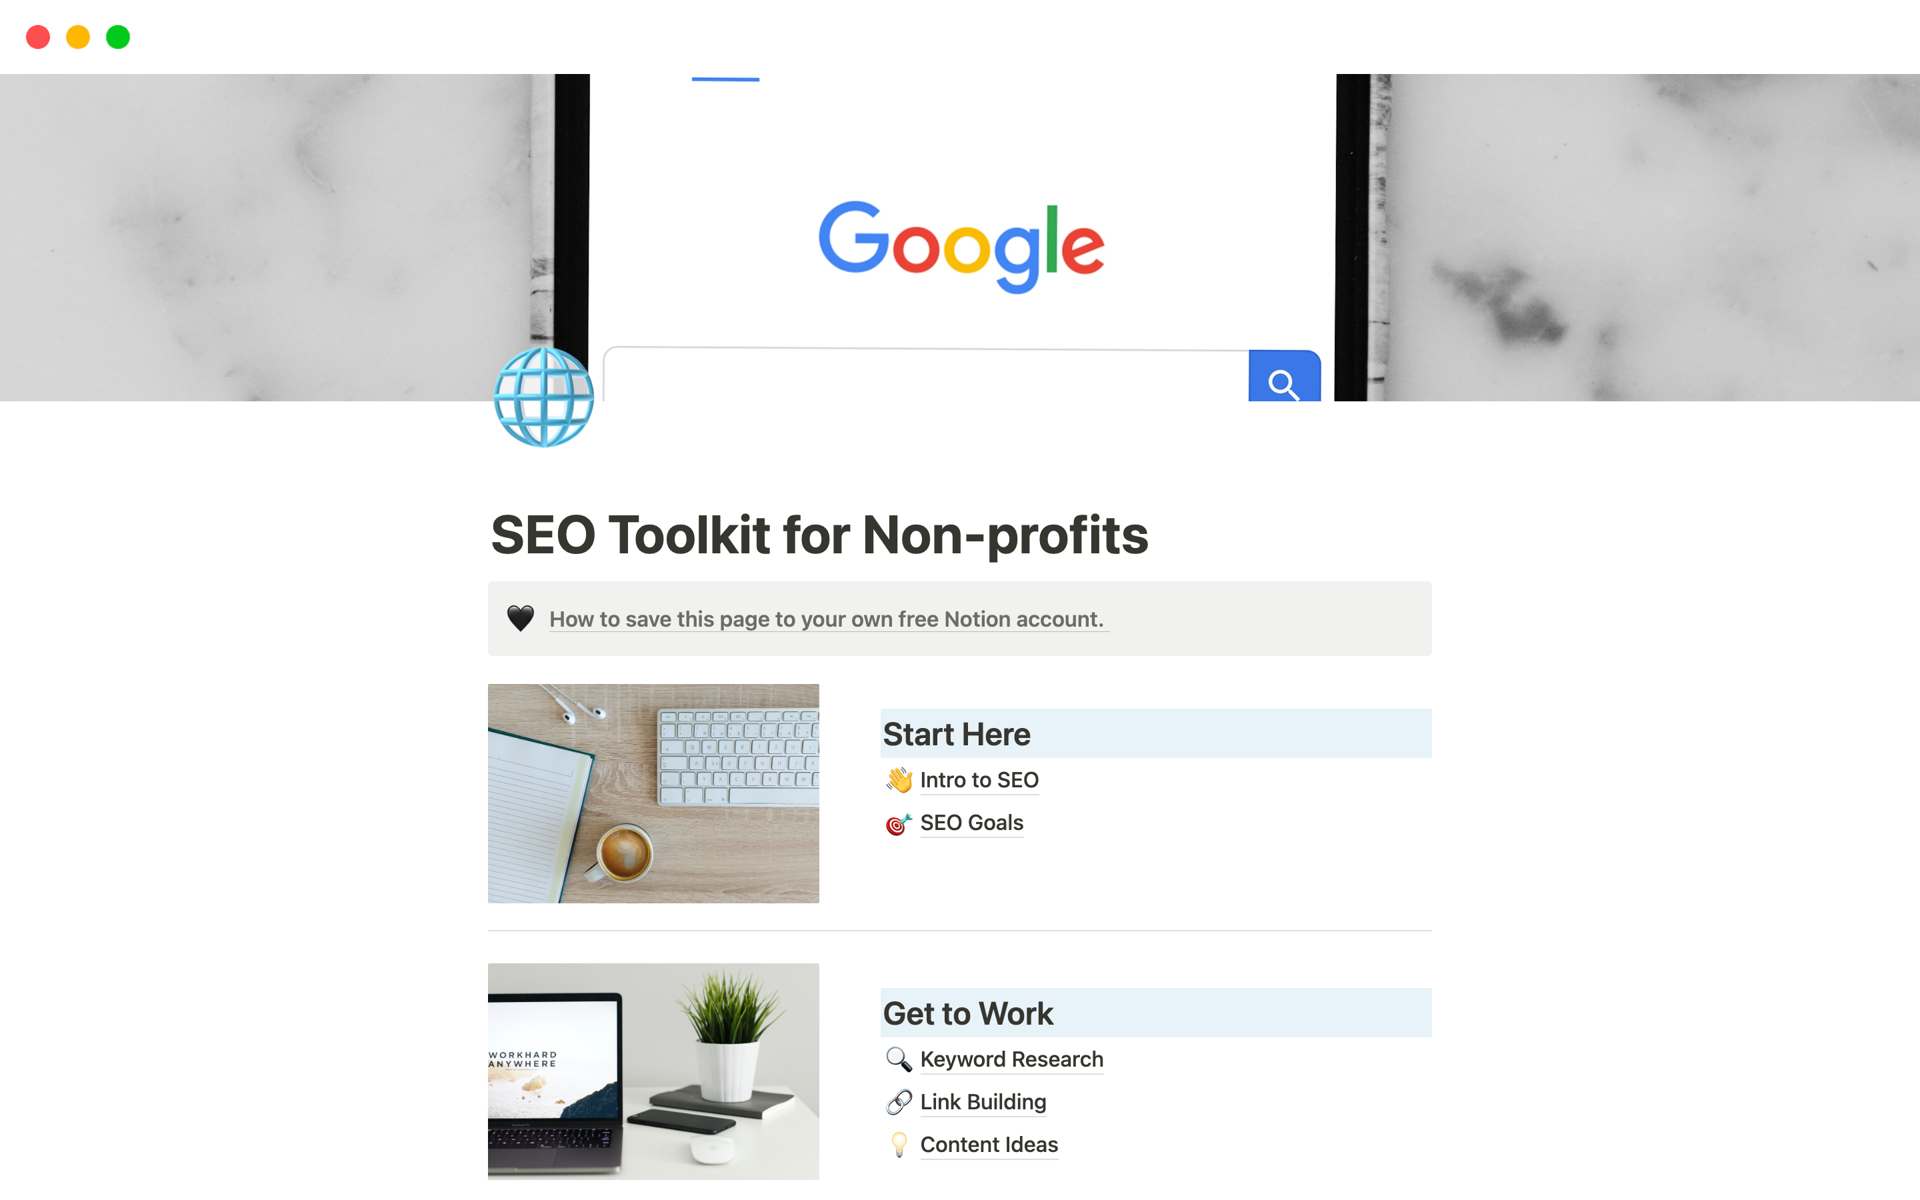 By implementing effective SEO strategies, non-profit organizations can enhance their visibility, improve their website's rankings, and ultimately make a greater impact on the causes they champion.